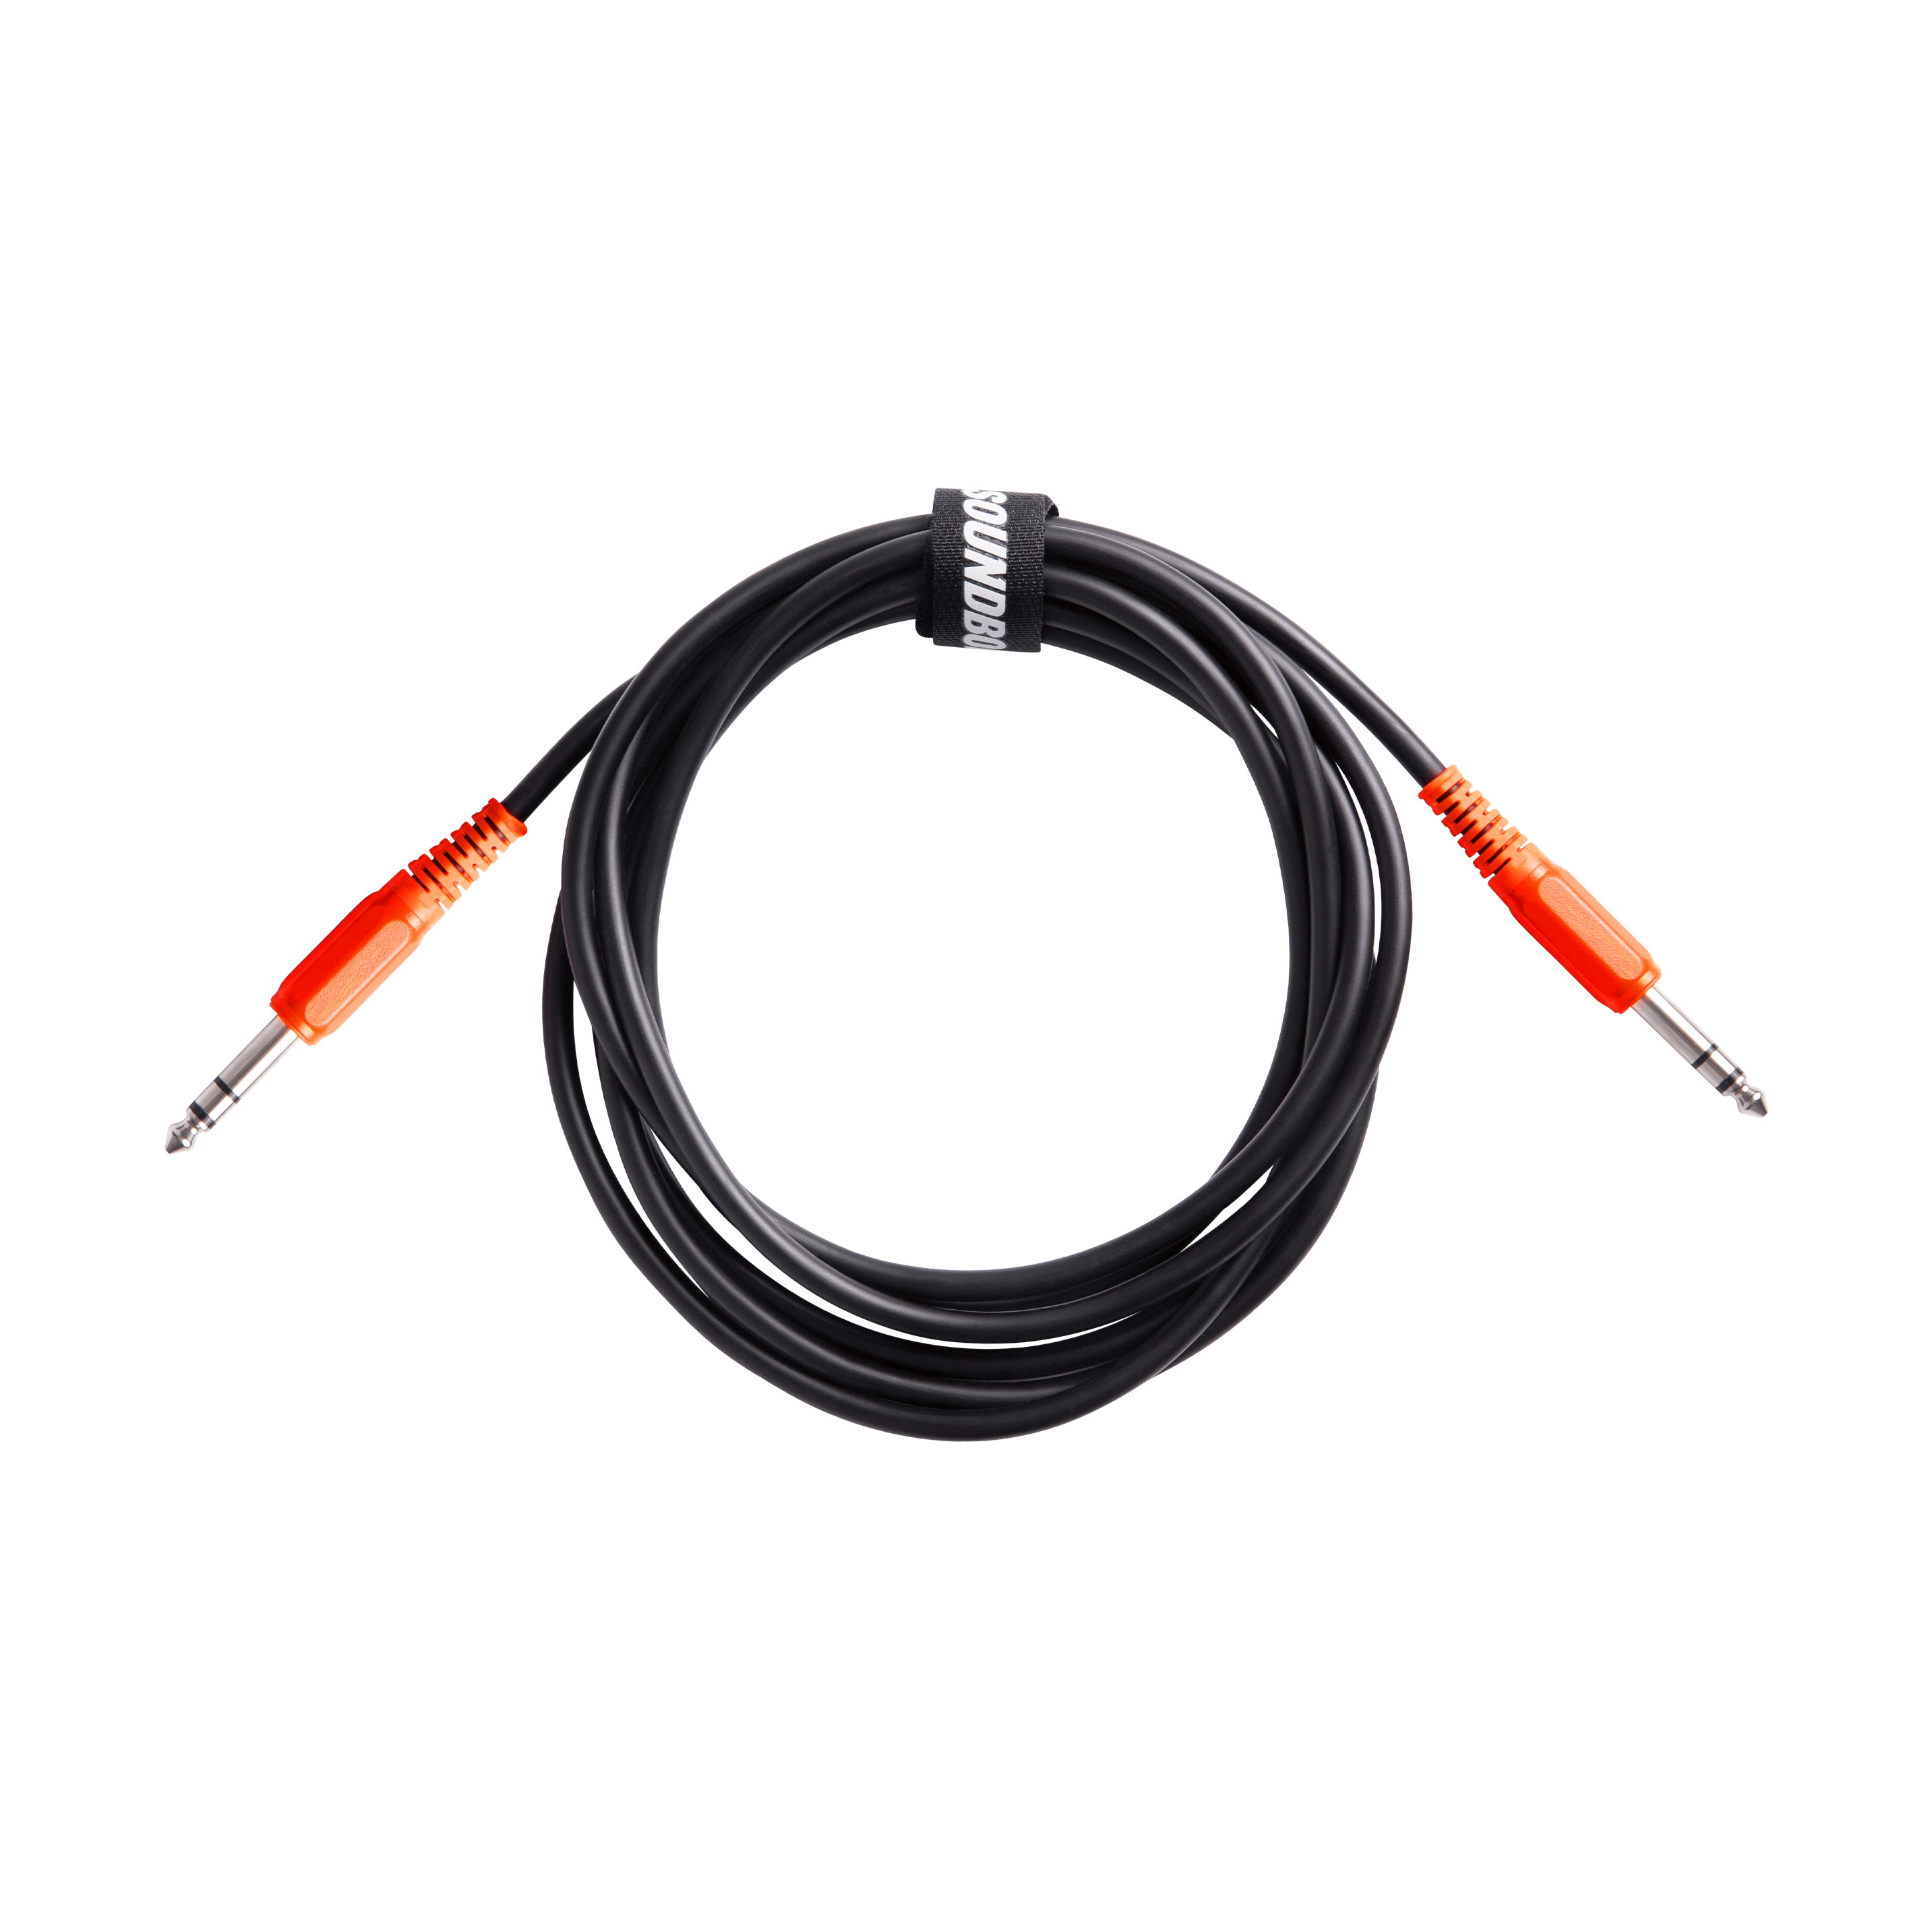 1/4" TRS CABLE